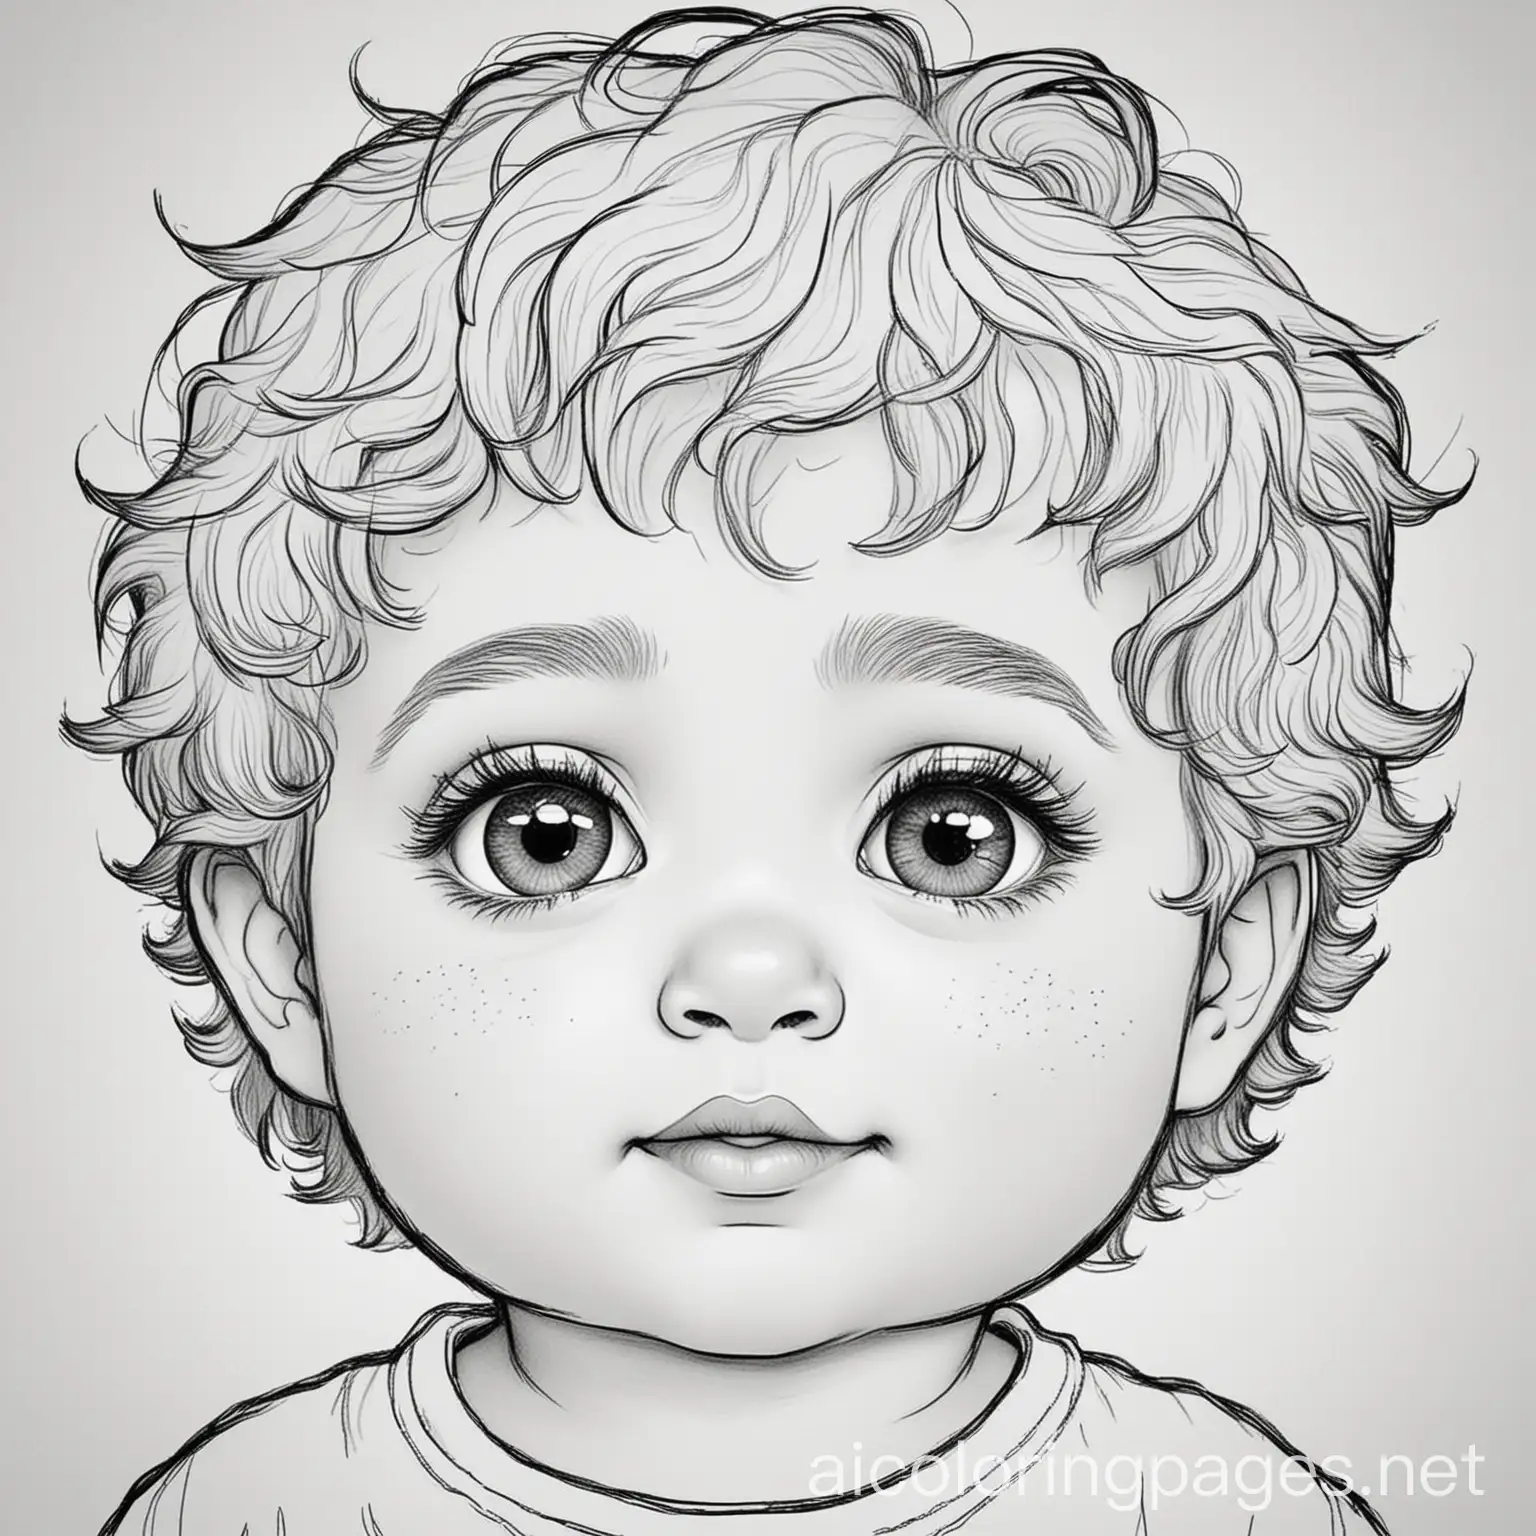 Adorable-WavyHaired-Baby-Boy-Twins-Coloring-Page-Simple-Black-and-White-Line-Art-for-Easy-Coloring